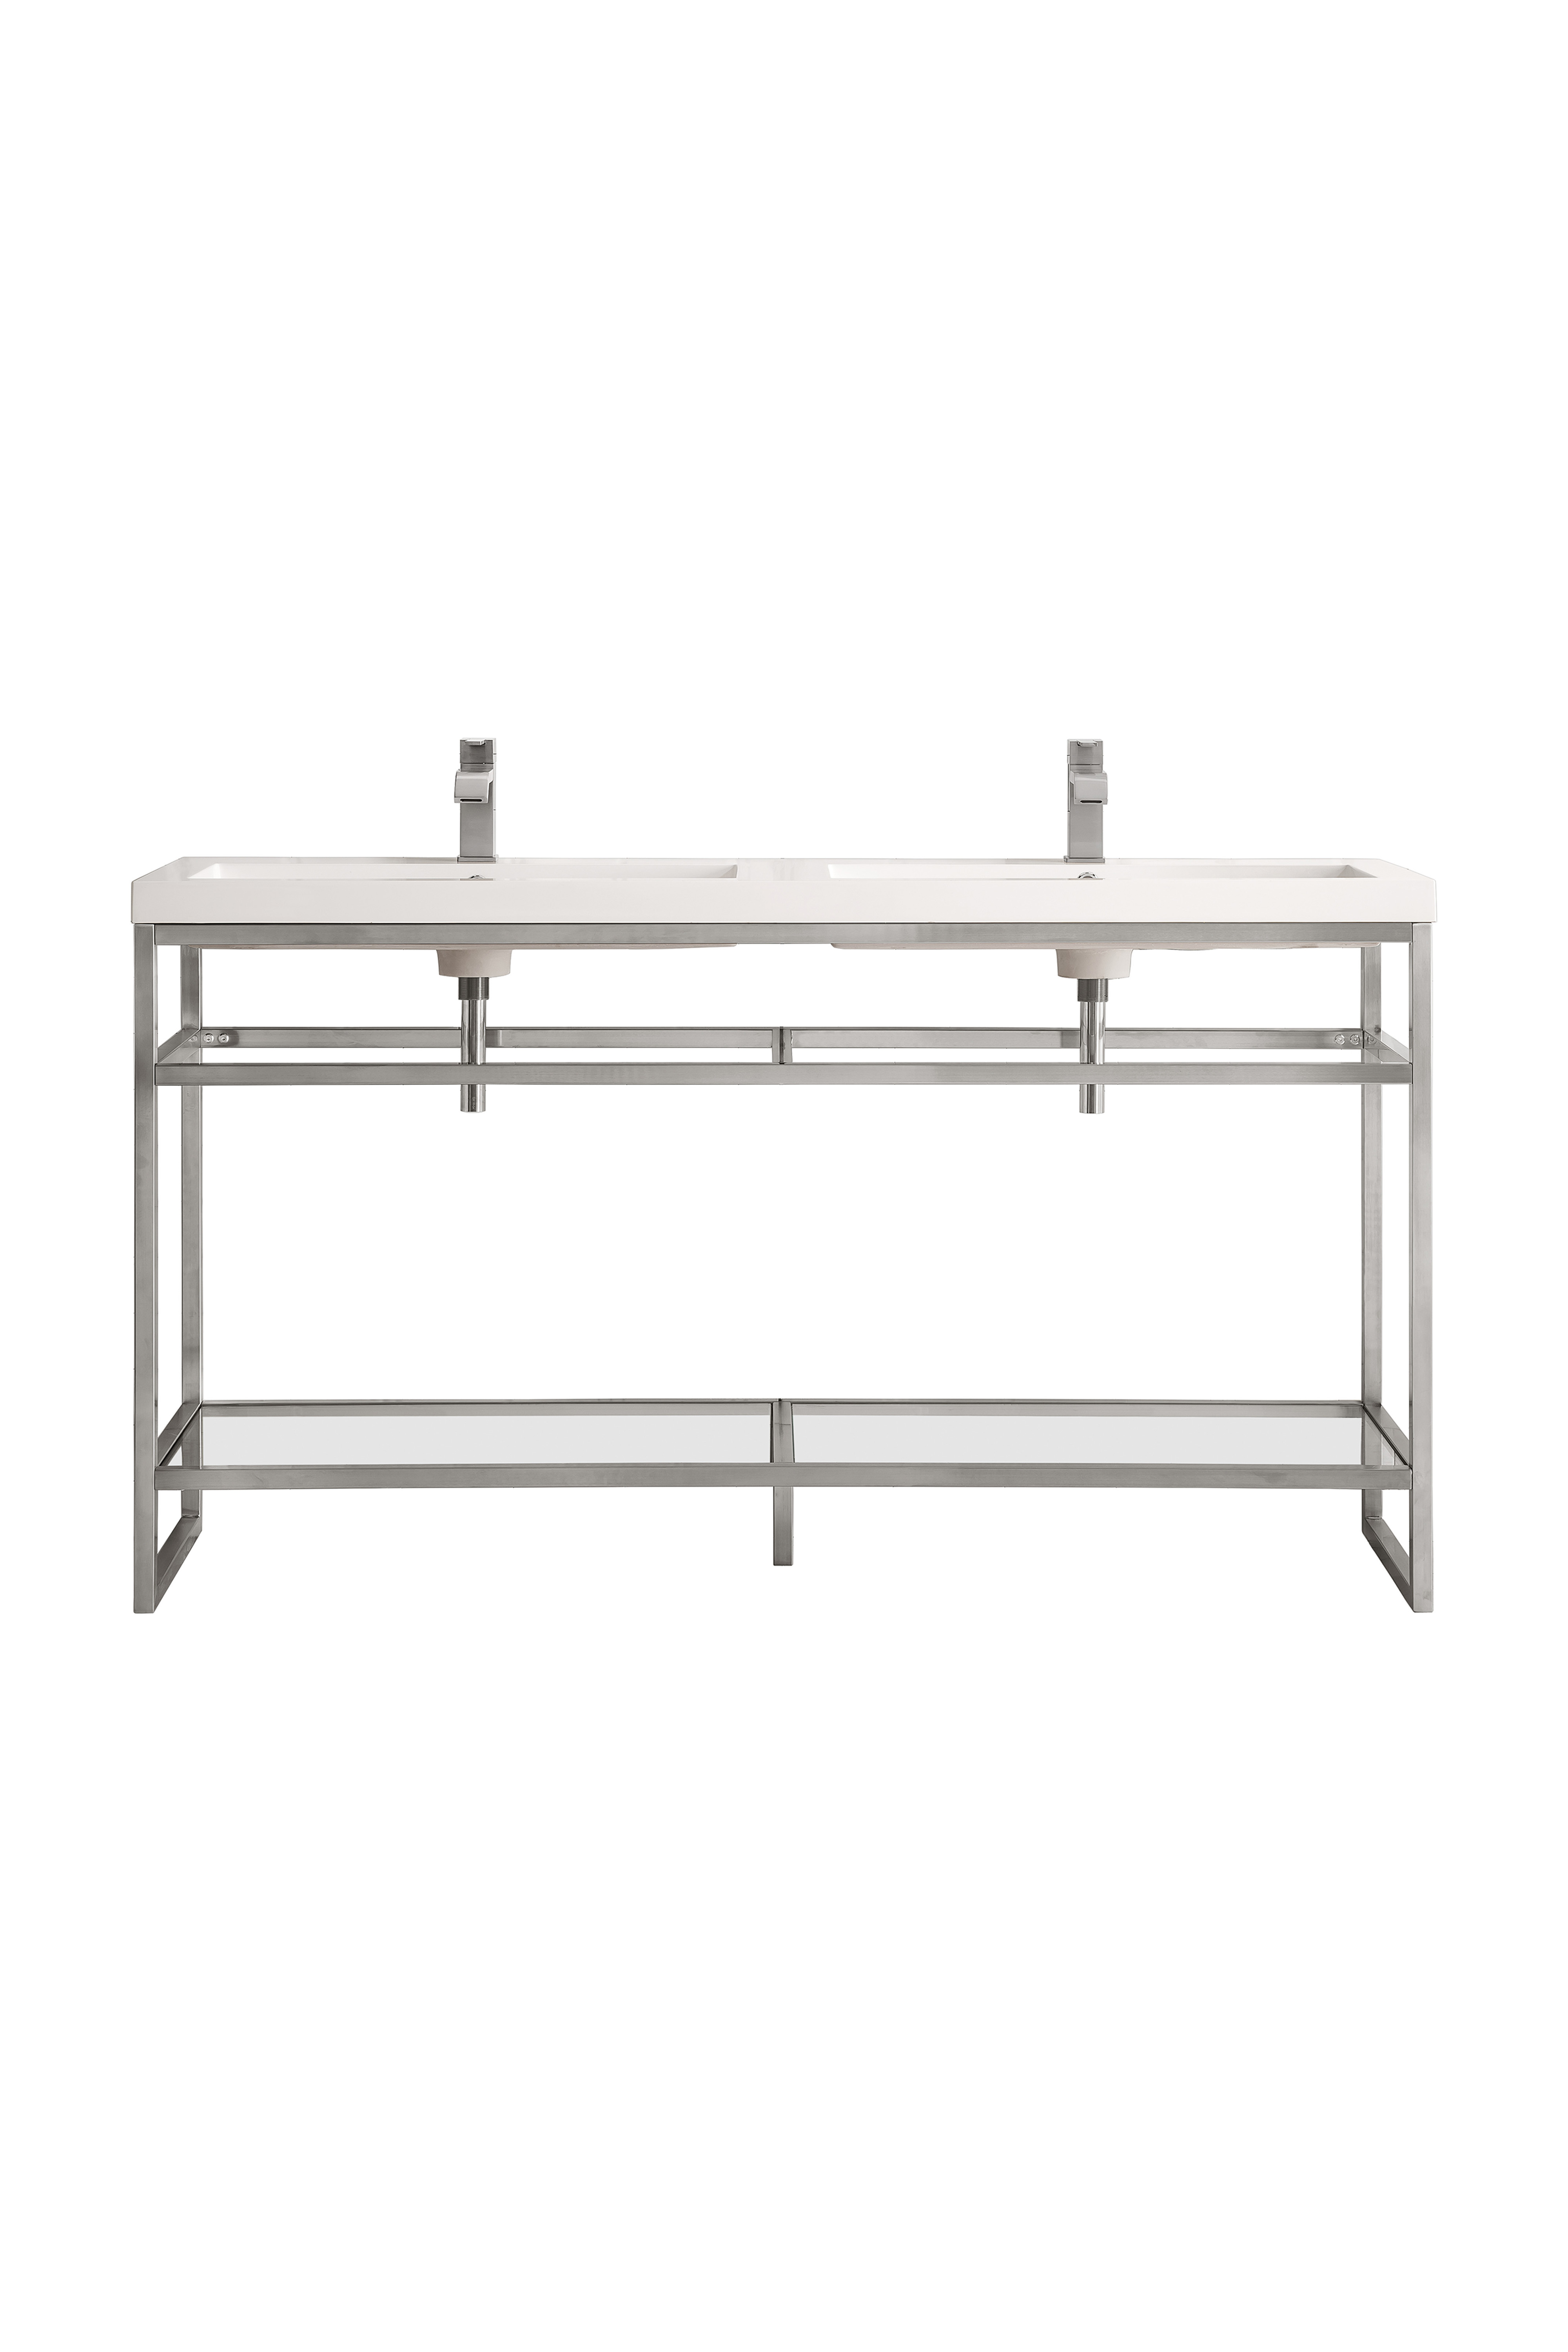 James Martin C105V63BNKWG Boston 63" Stainless Steel Sink Console (Double Basins), Brushed Nickel w/ White Glossy Composite Countertop